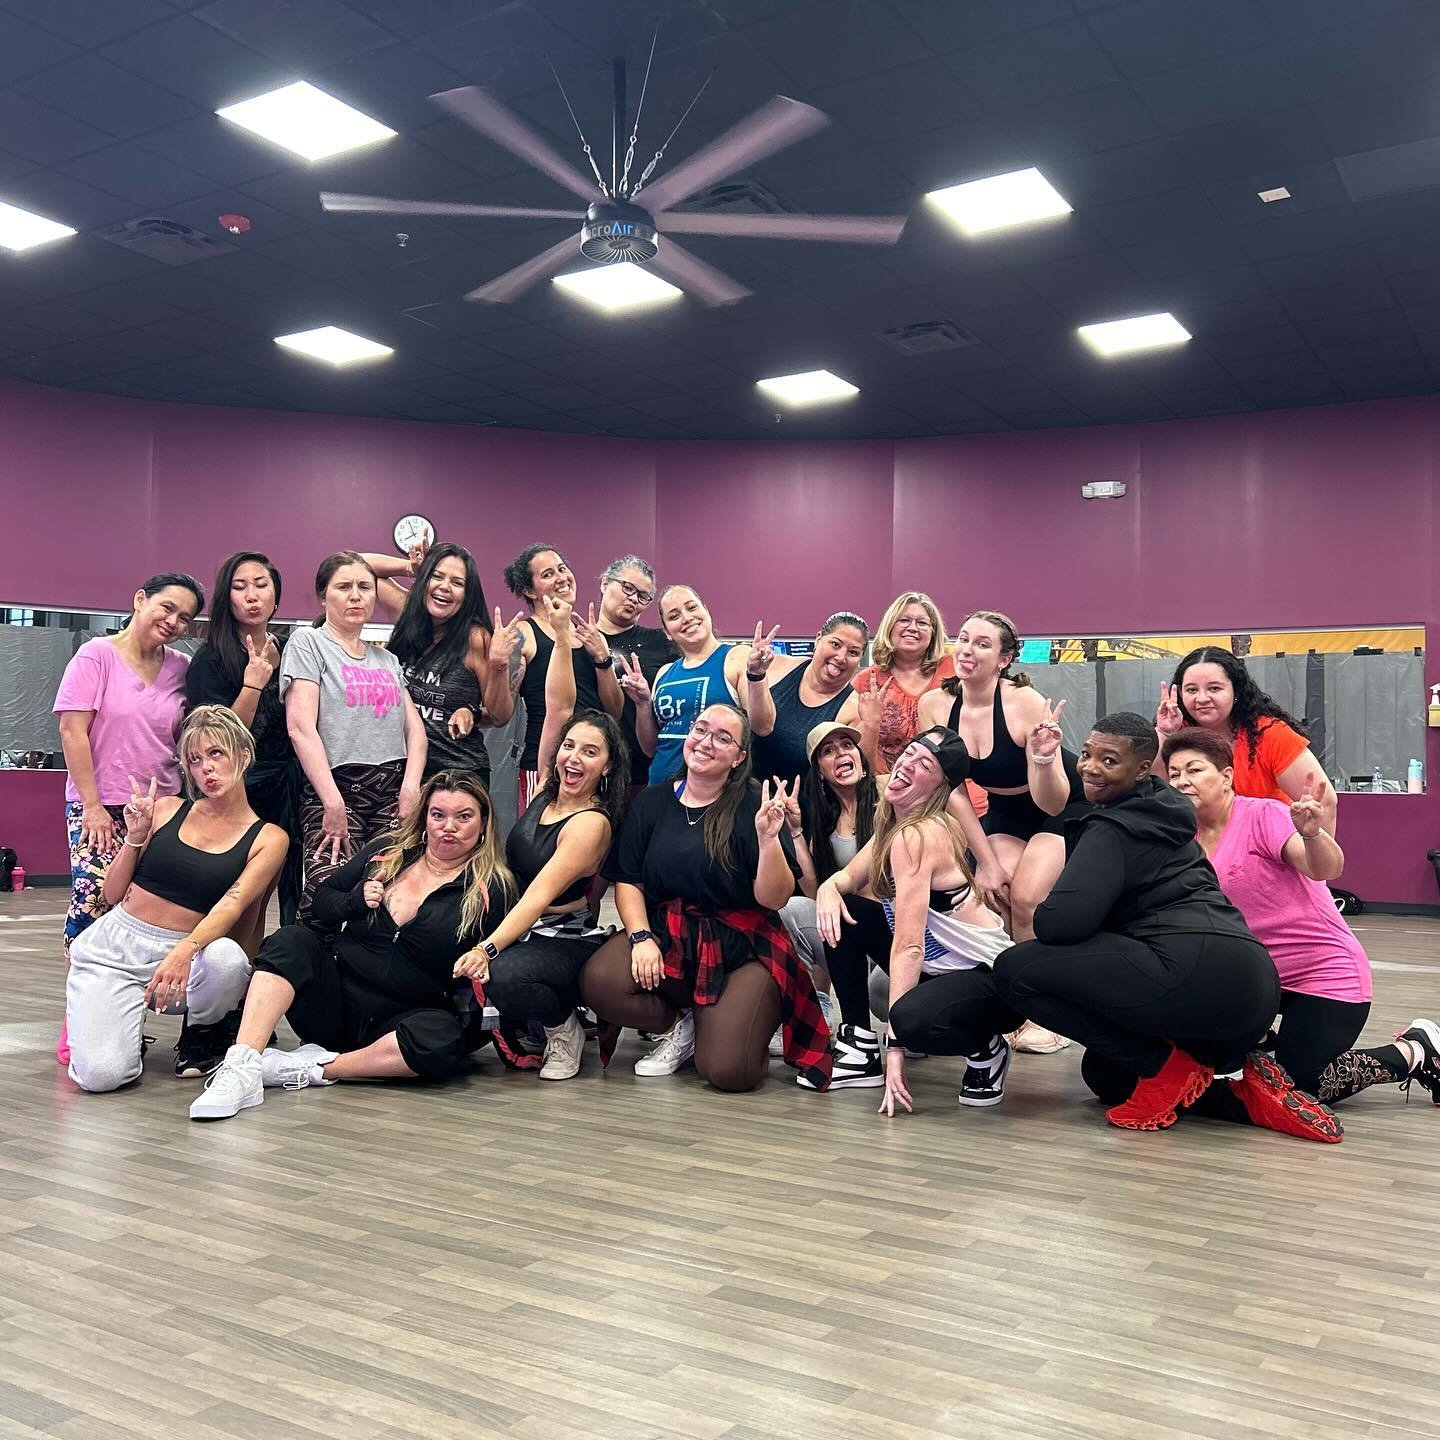 SO PROUD of all these hot mamas who slayed last night&rsquo;s choreography class! 🔥🥰 As an instructor, it&rsquo;s the best feeling watching each woman come out of her shell and feel confident in her body. 

Thank you to my co-instructor Natalie (@m